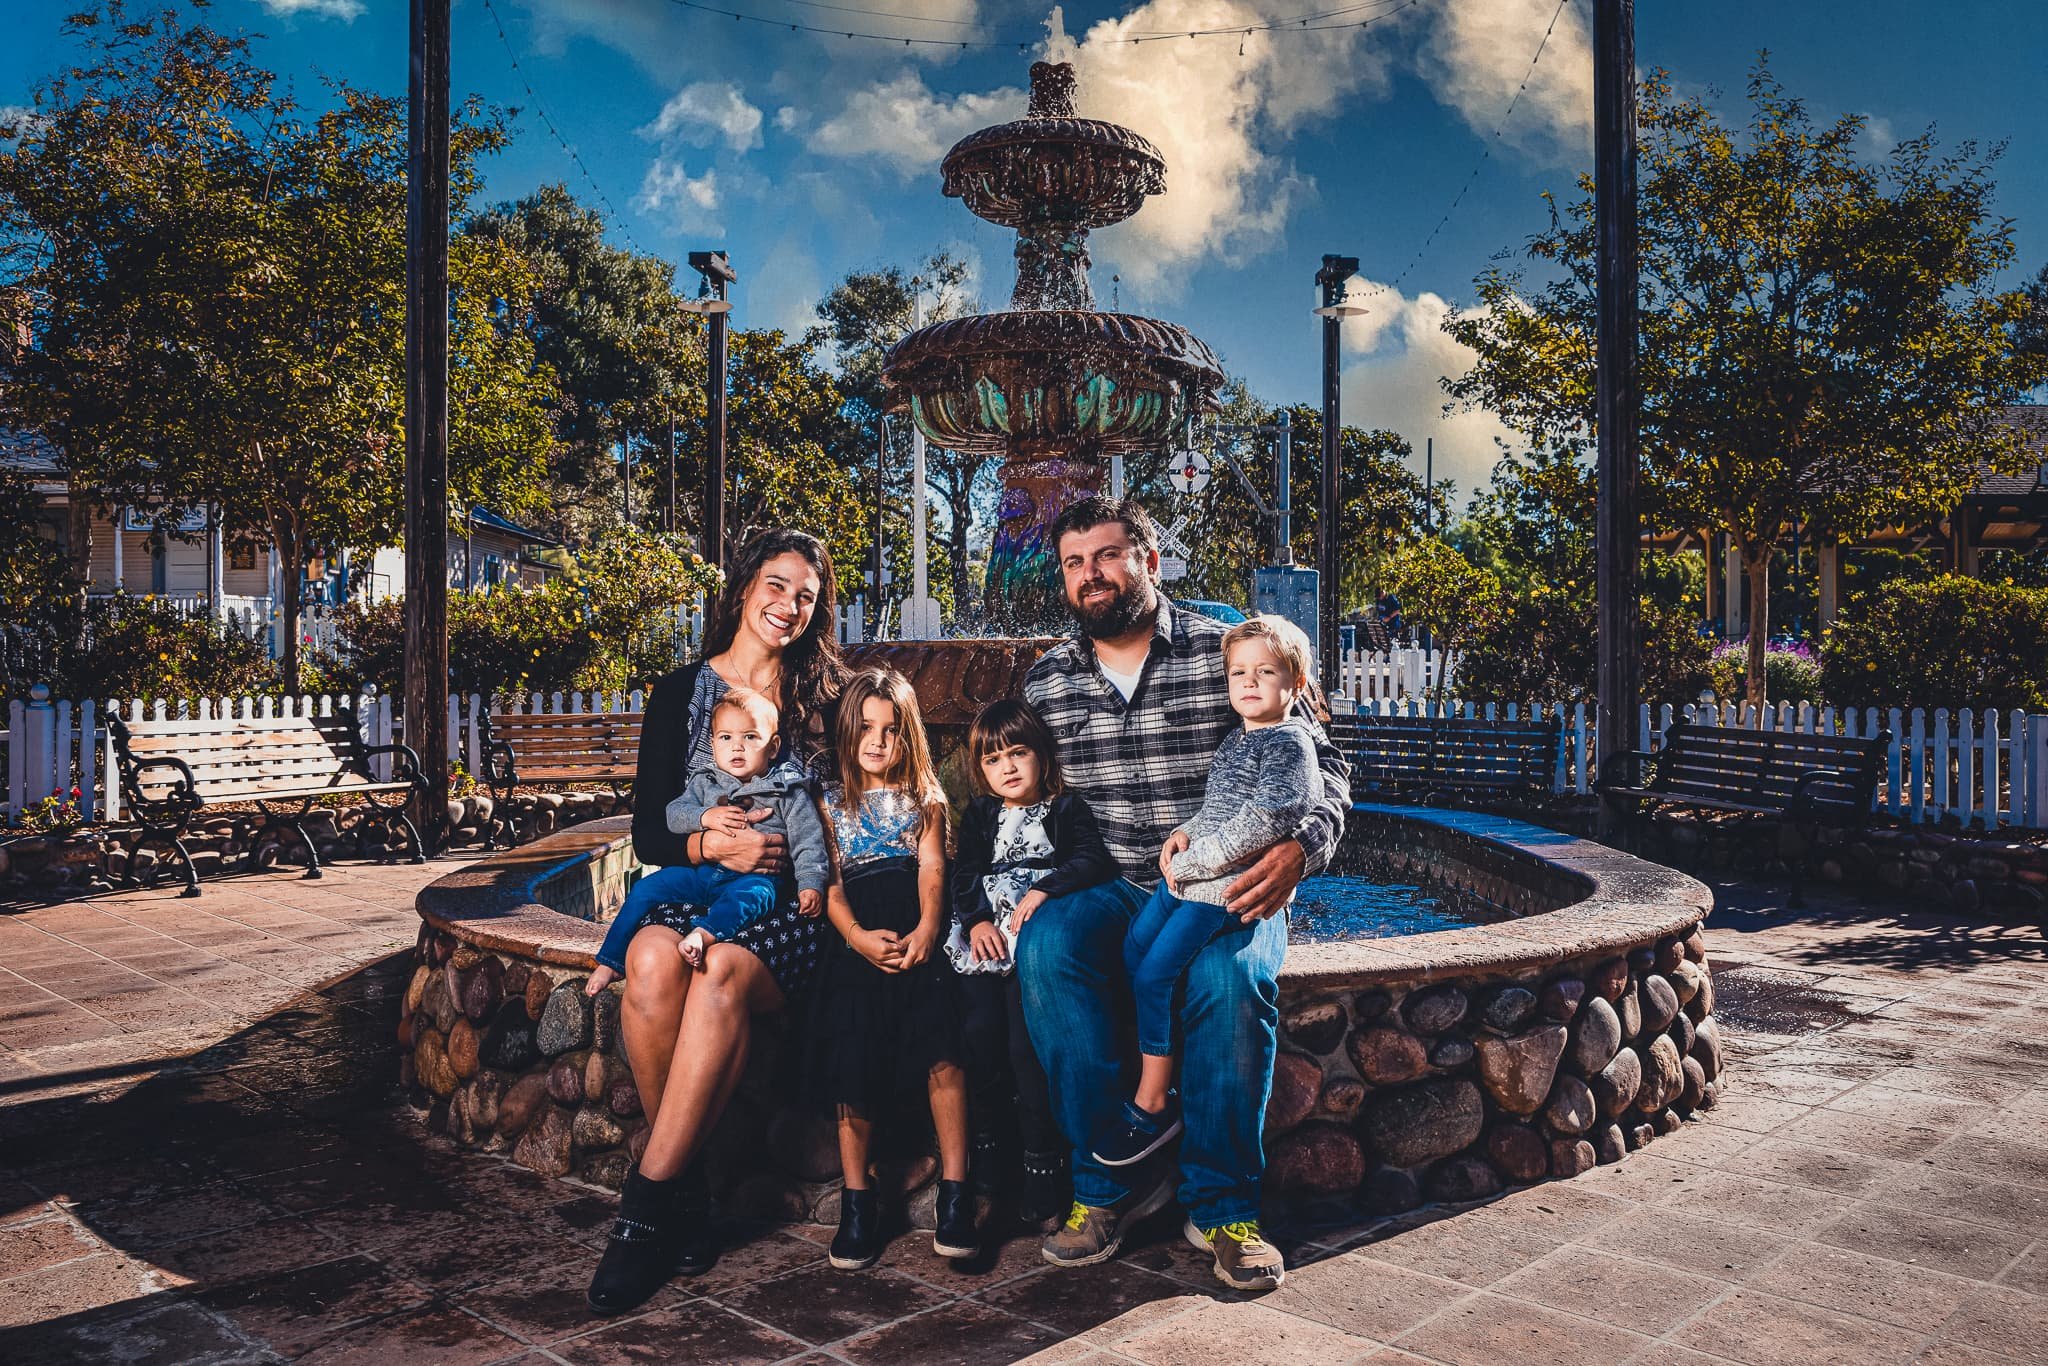 Old Poway Park | Southern California Family Portrait Photo Session-1.jpg